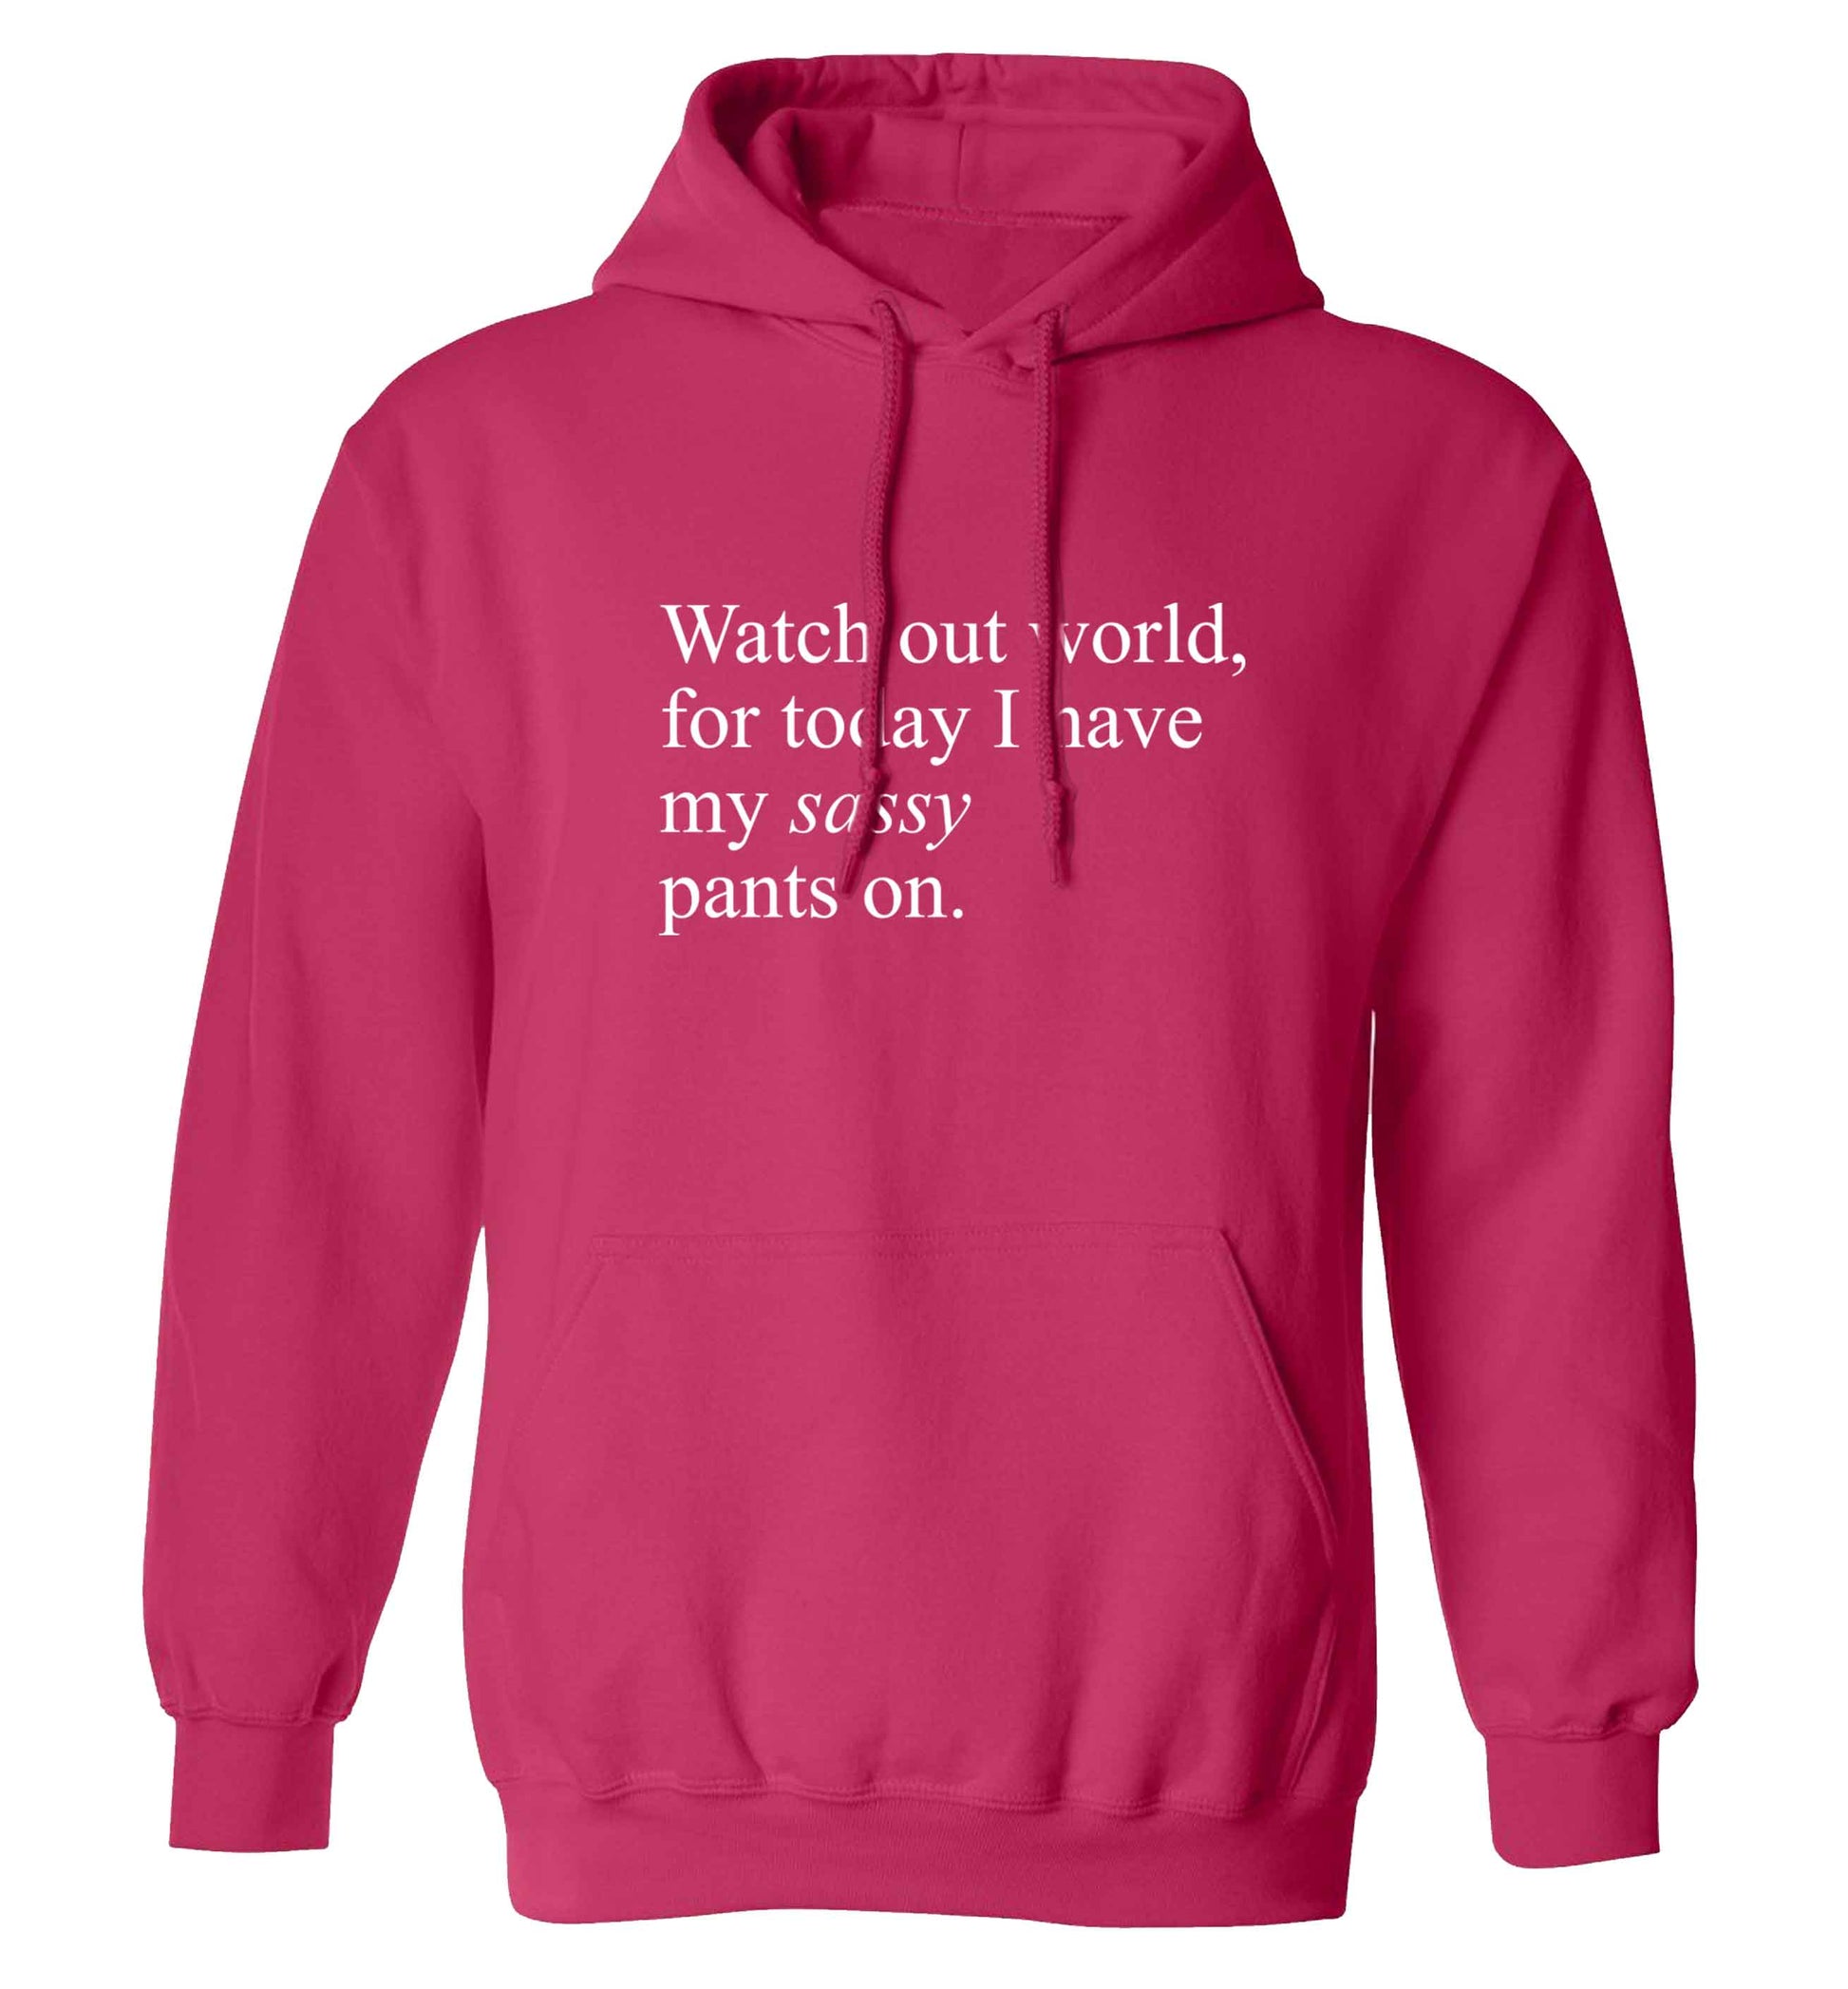 Watch out world for today I have my sassy pants on adults unisex pink hoodie 2XL